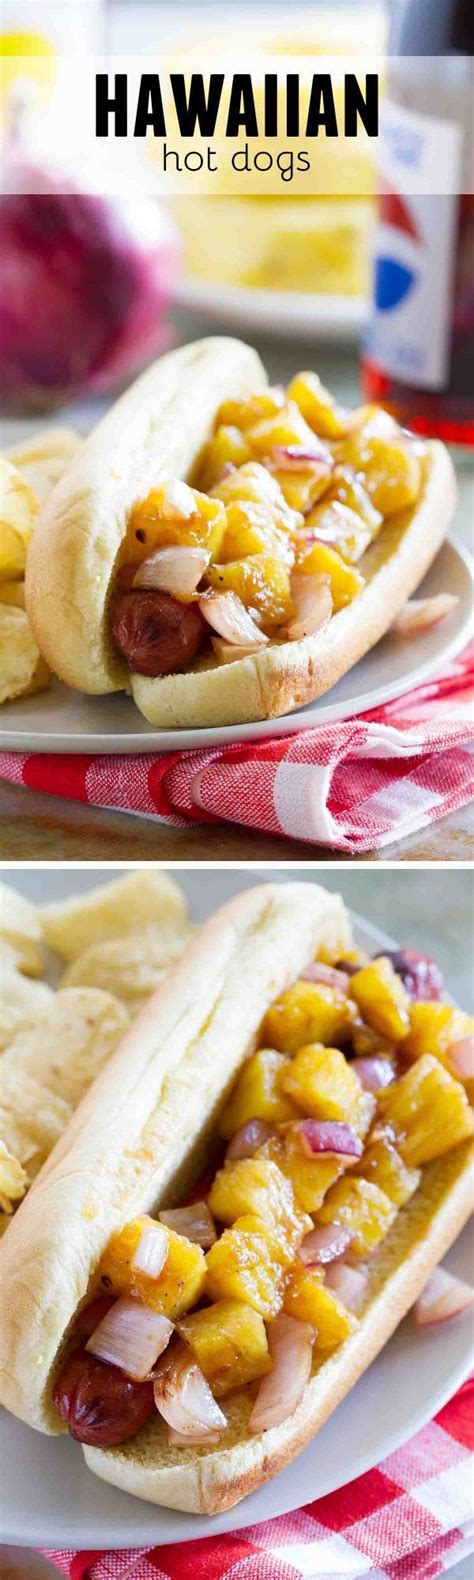 Take a taste of the tropics with these Hawaiian Hot Dogs - grilled hot dogs topped with grilled ...